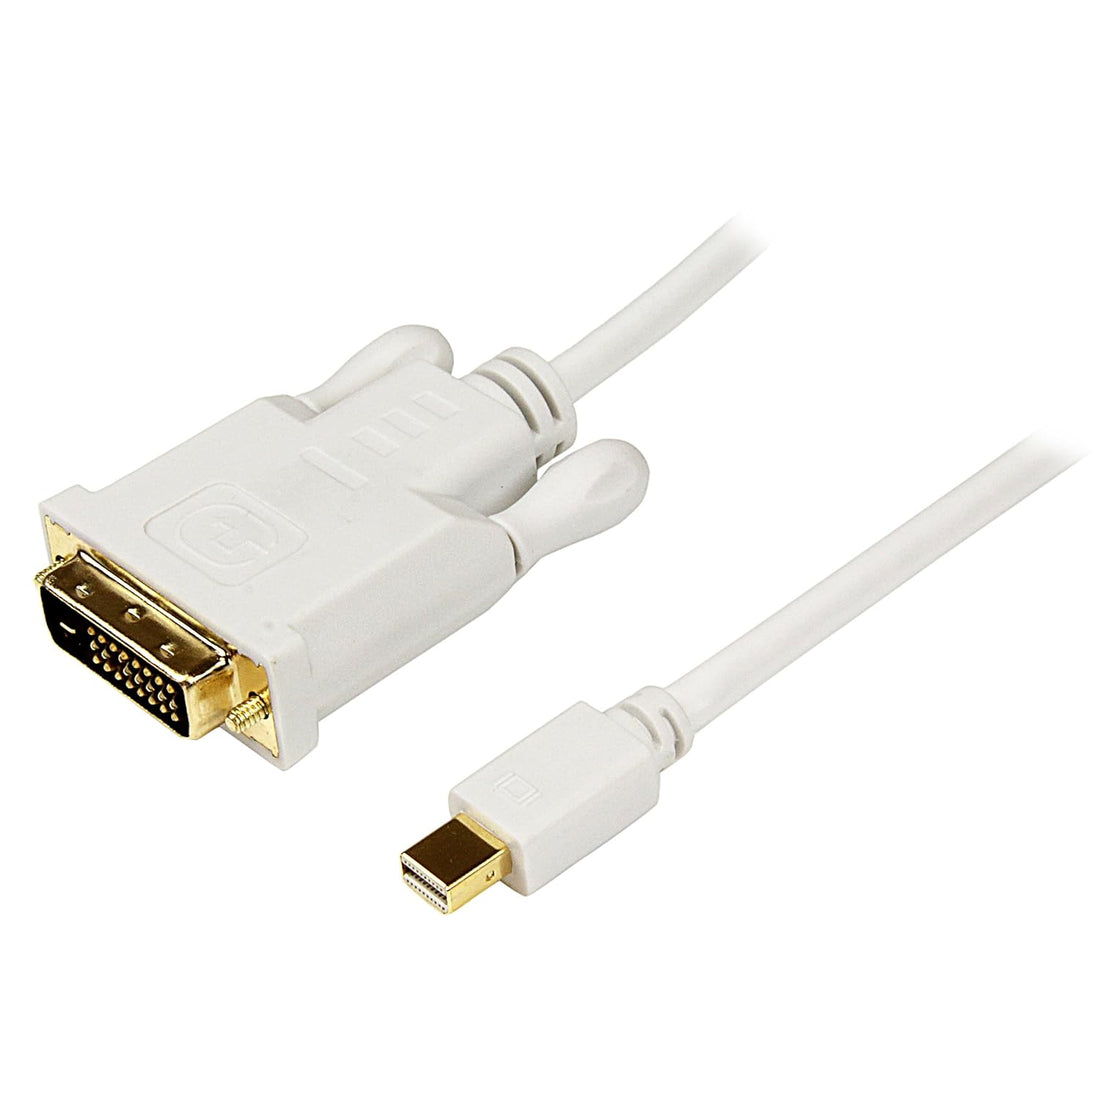 StarTech.com 6 ft Mini DisplayPort to DVI Adapter Cable - Mini DP to DVI Video Converter - MDP to DVI Cable for Mac / PC 1920x1200 - White (MDP2DVIMM6W)